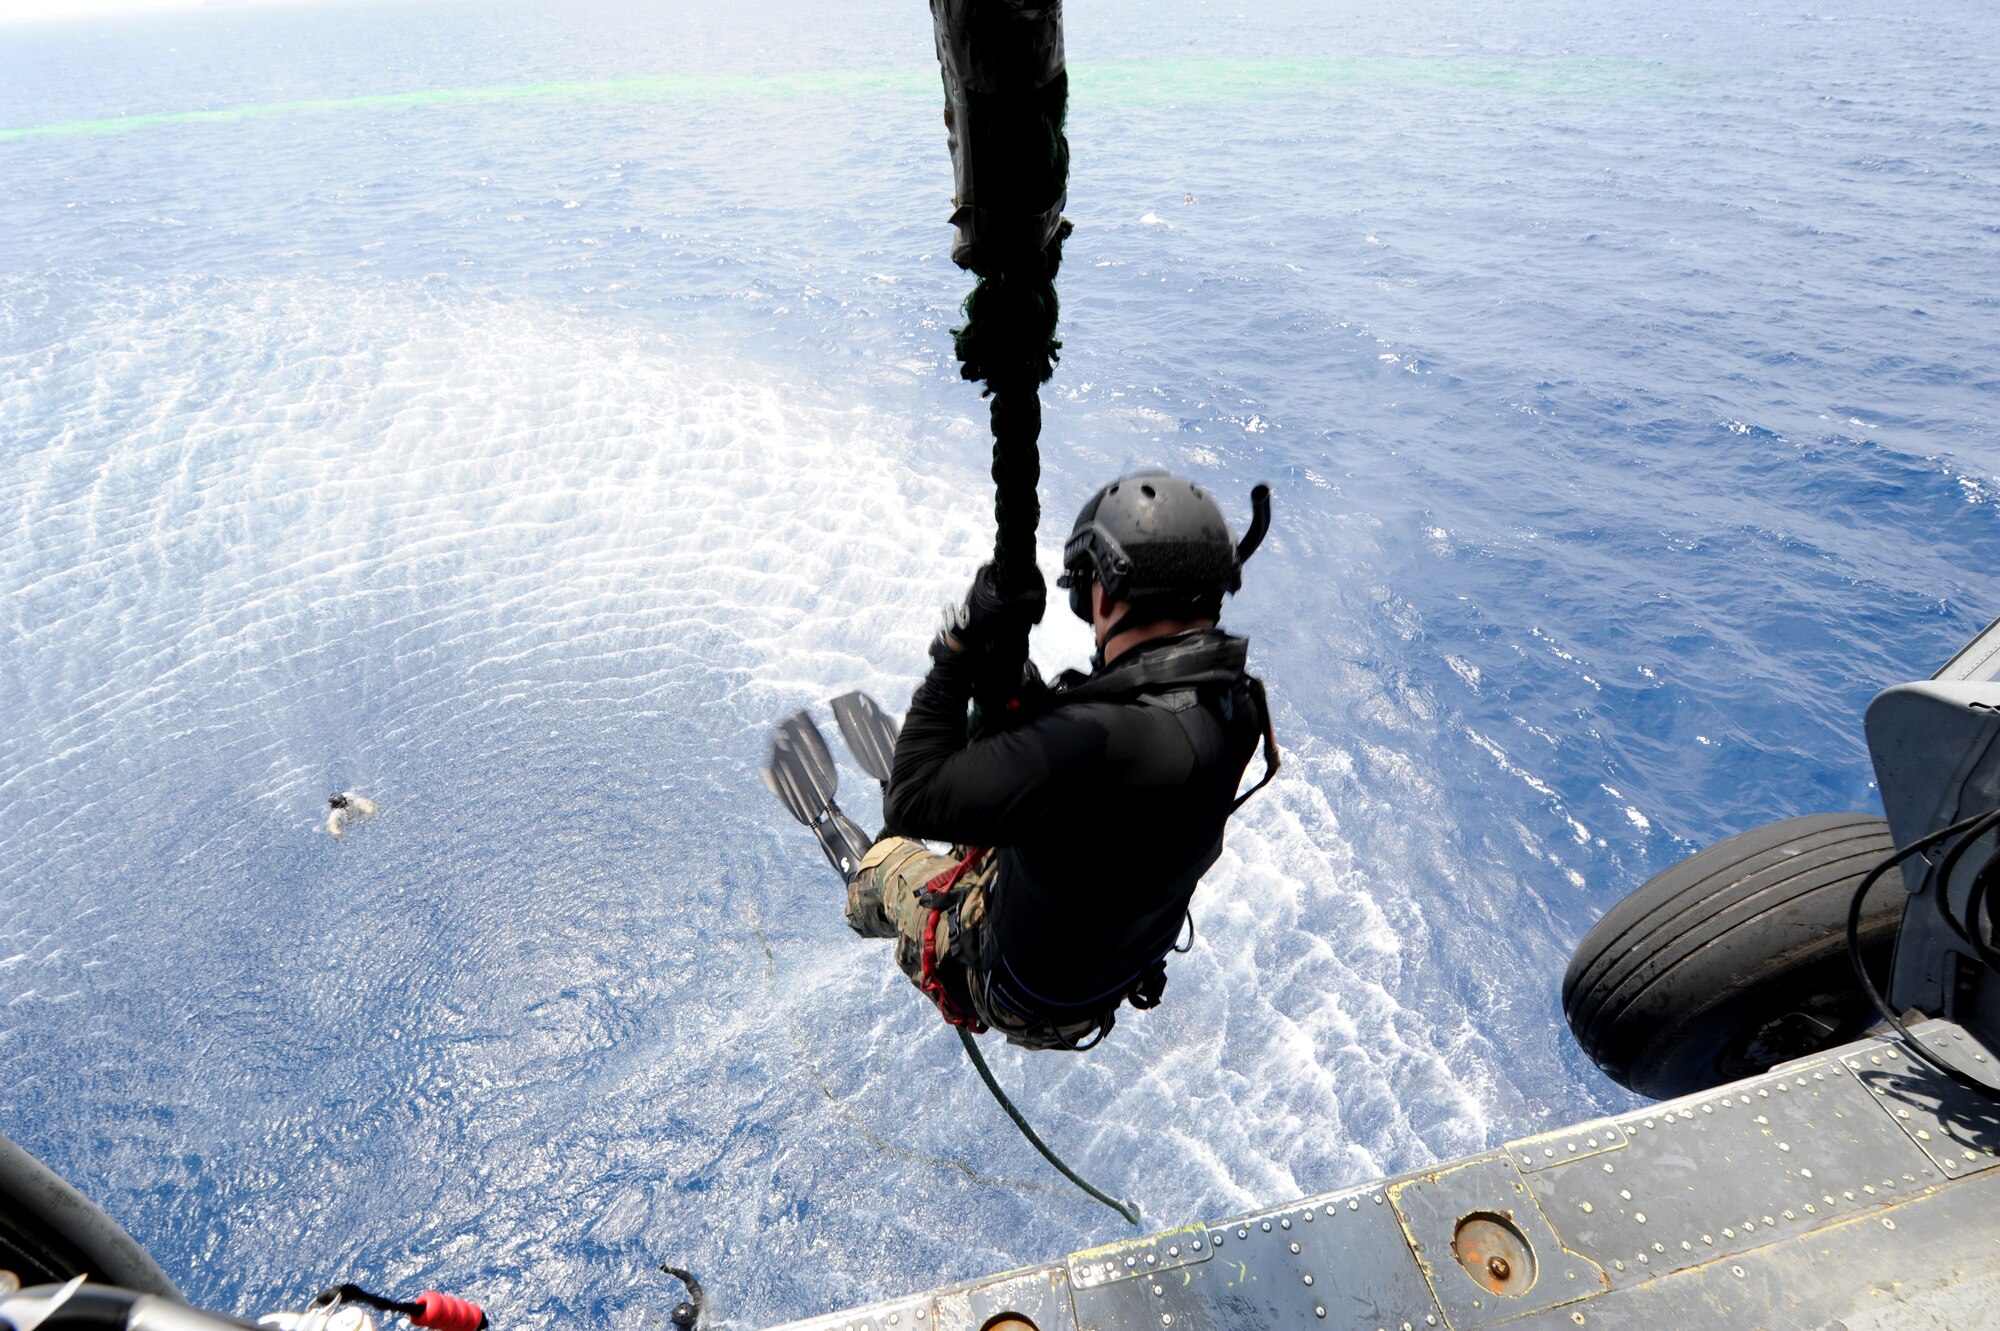 Brig. Gen. Matt Molloy, 18th Wing commander, jumps into the ocean during a joint field training exercise off the coast of Okinawa Sept. 1. The commander participated in the exercise with members from the 31st and 33rd Rescue Squadrons to get a first-hand experience of water survival, search and rescue, close air support, and maritime defense and interdiction. (U.S. Air Force photo/Airman 1st Class Jarvie Z. Wallace)